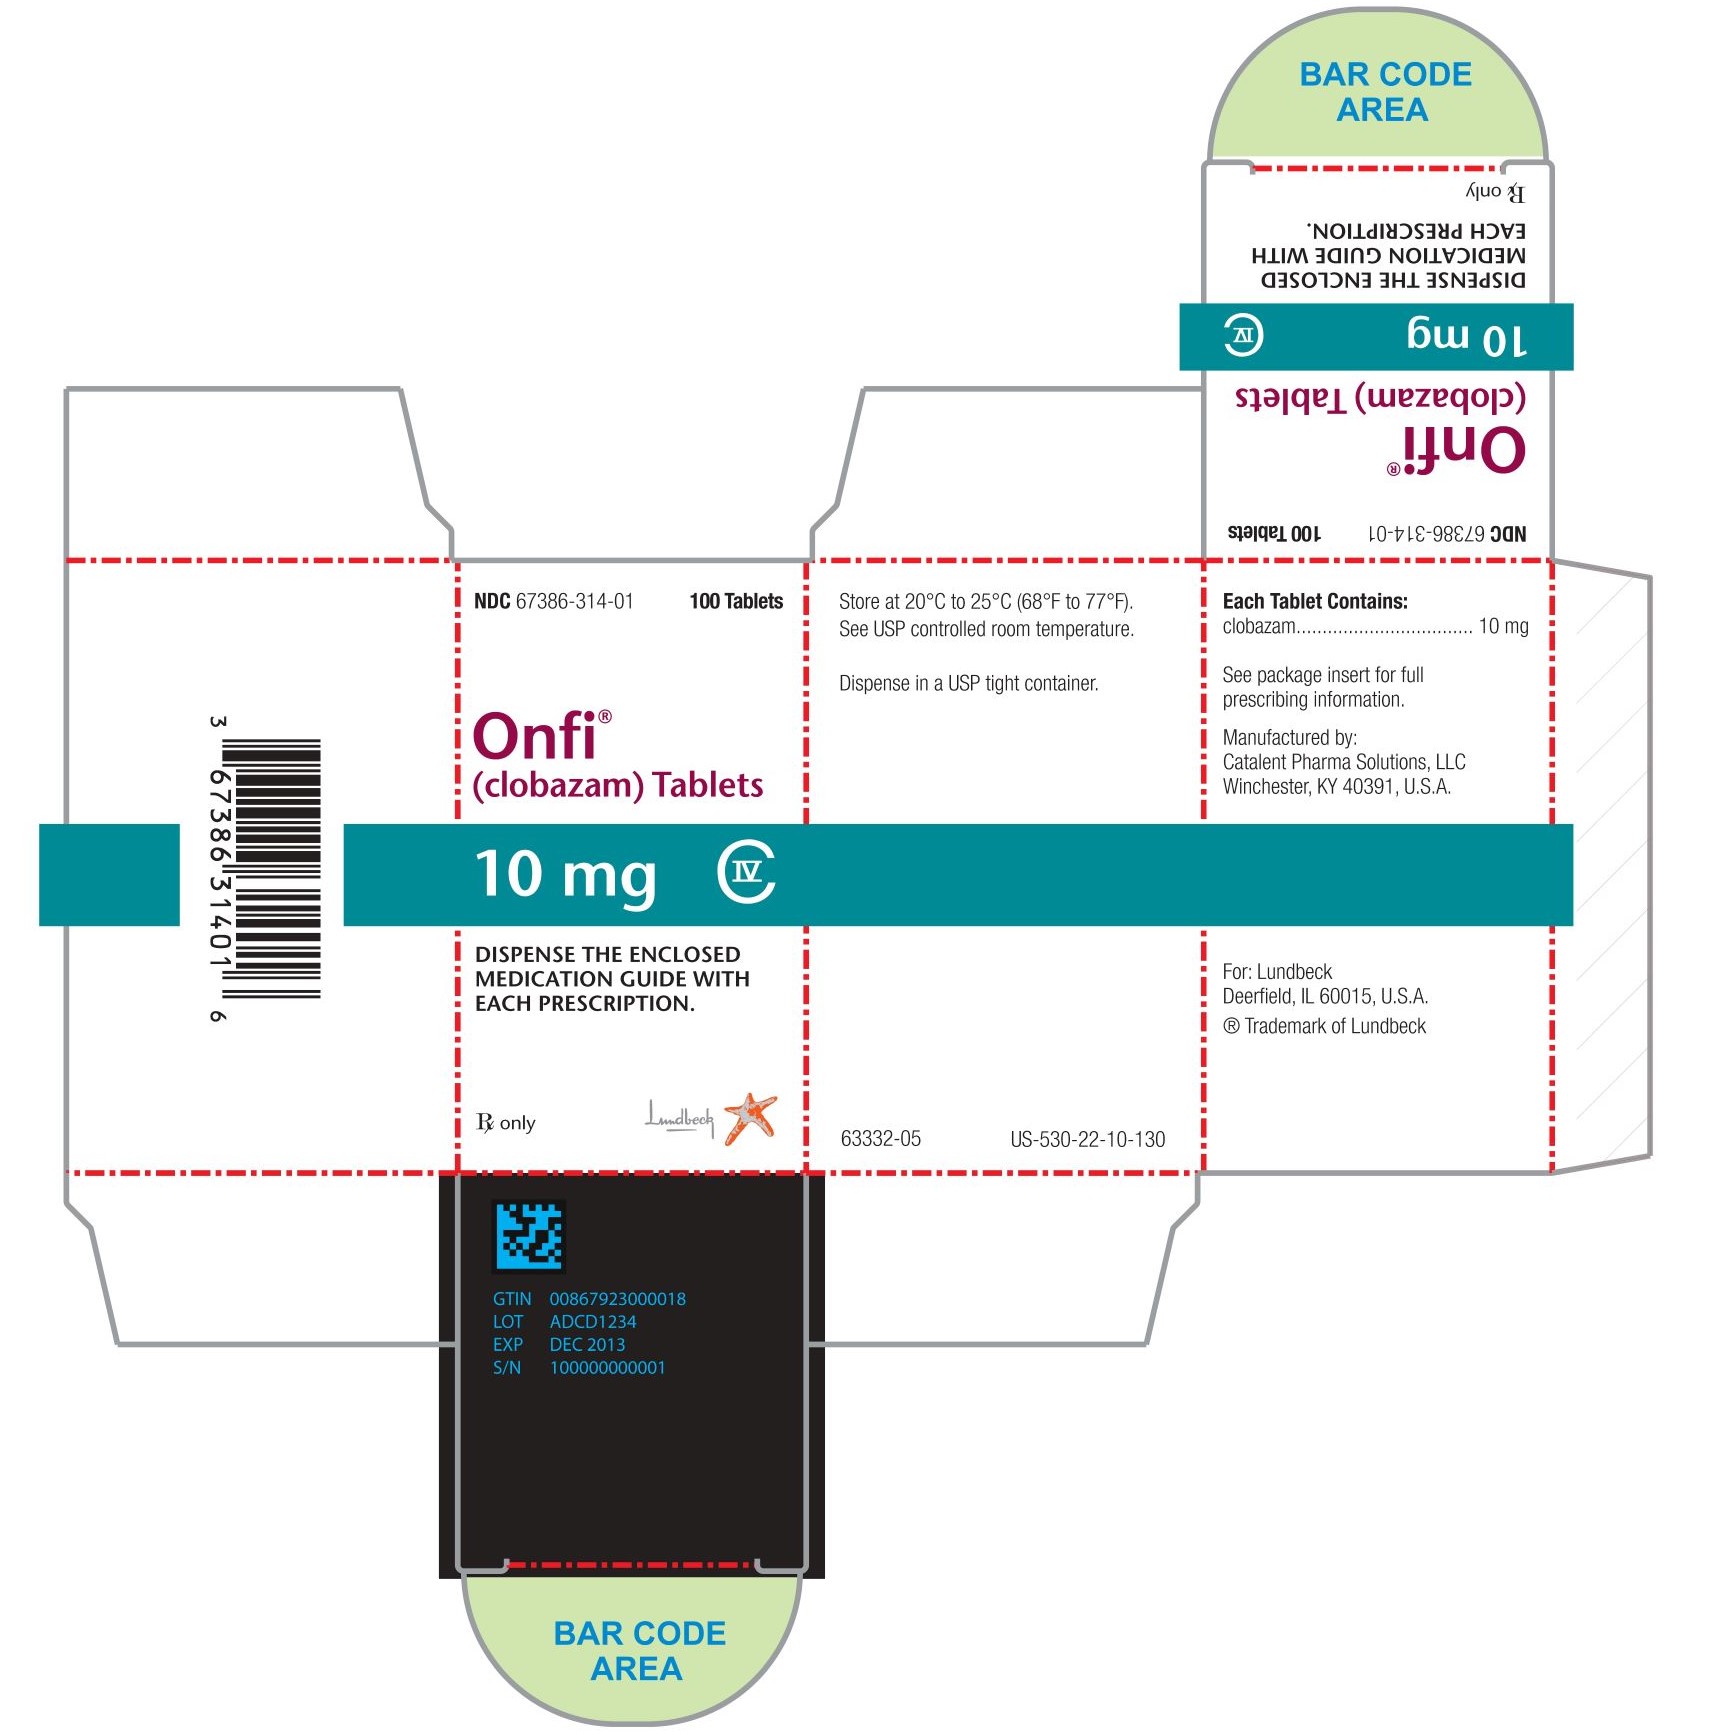 NDC 67386-314-01 100 Tablets Onfi® (clobazam) Tablets 10 mg C-IV DISPENSE THE ENCLOSED MEDICATION GUIDE WITH EACH PRESCRIPTION. Rx only